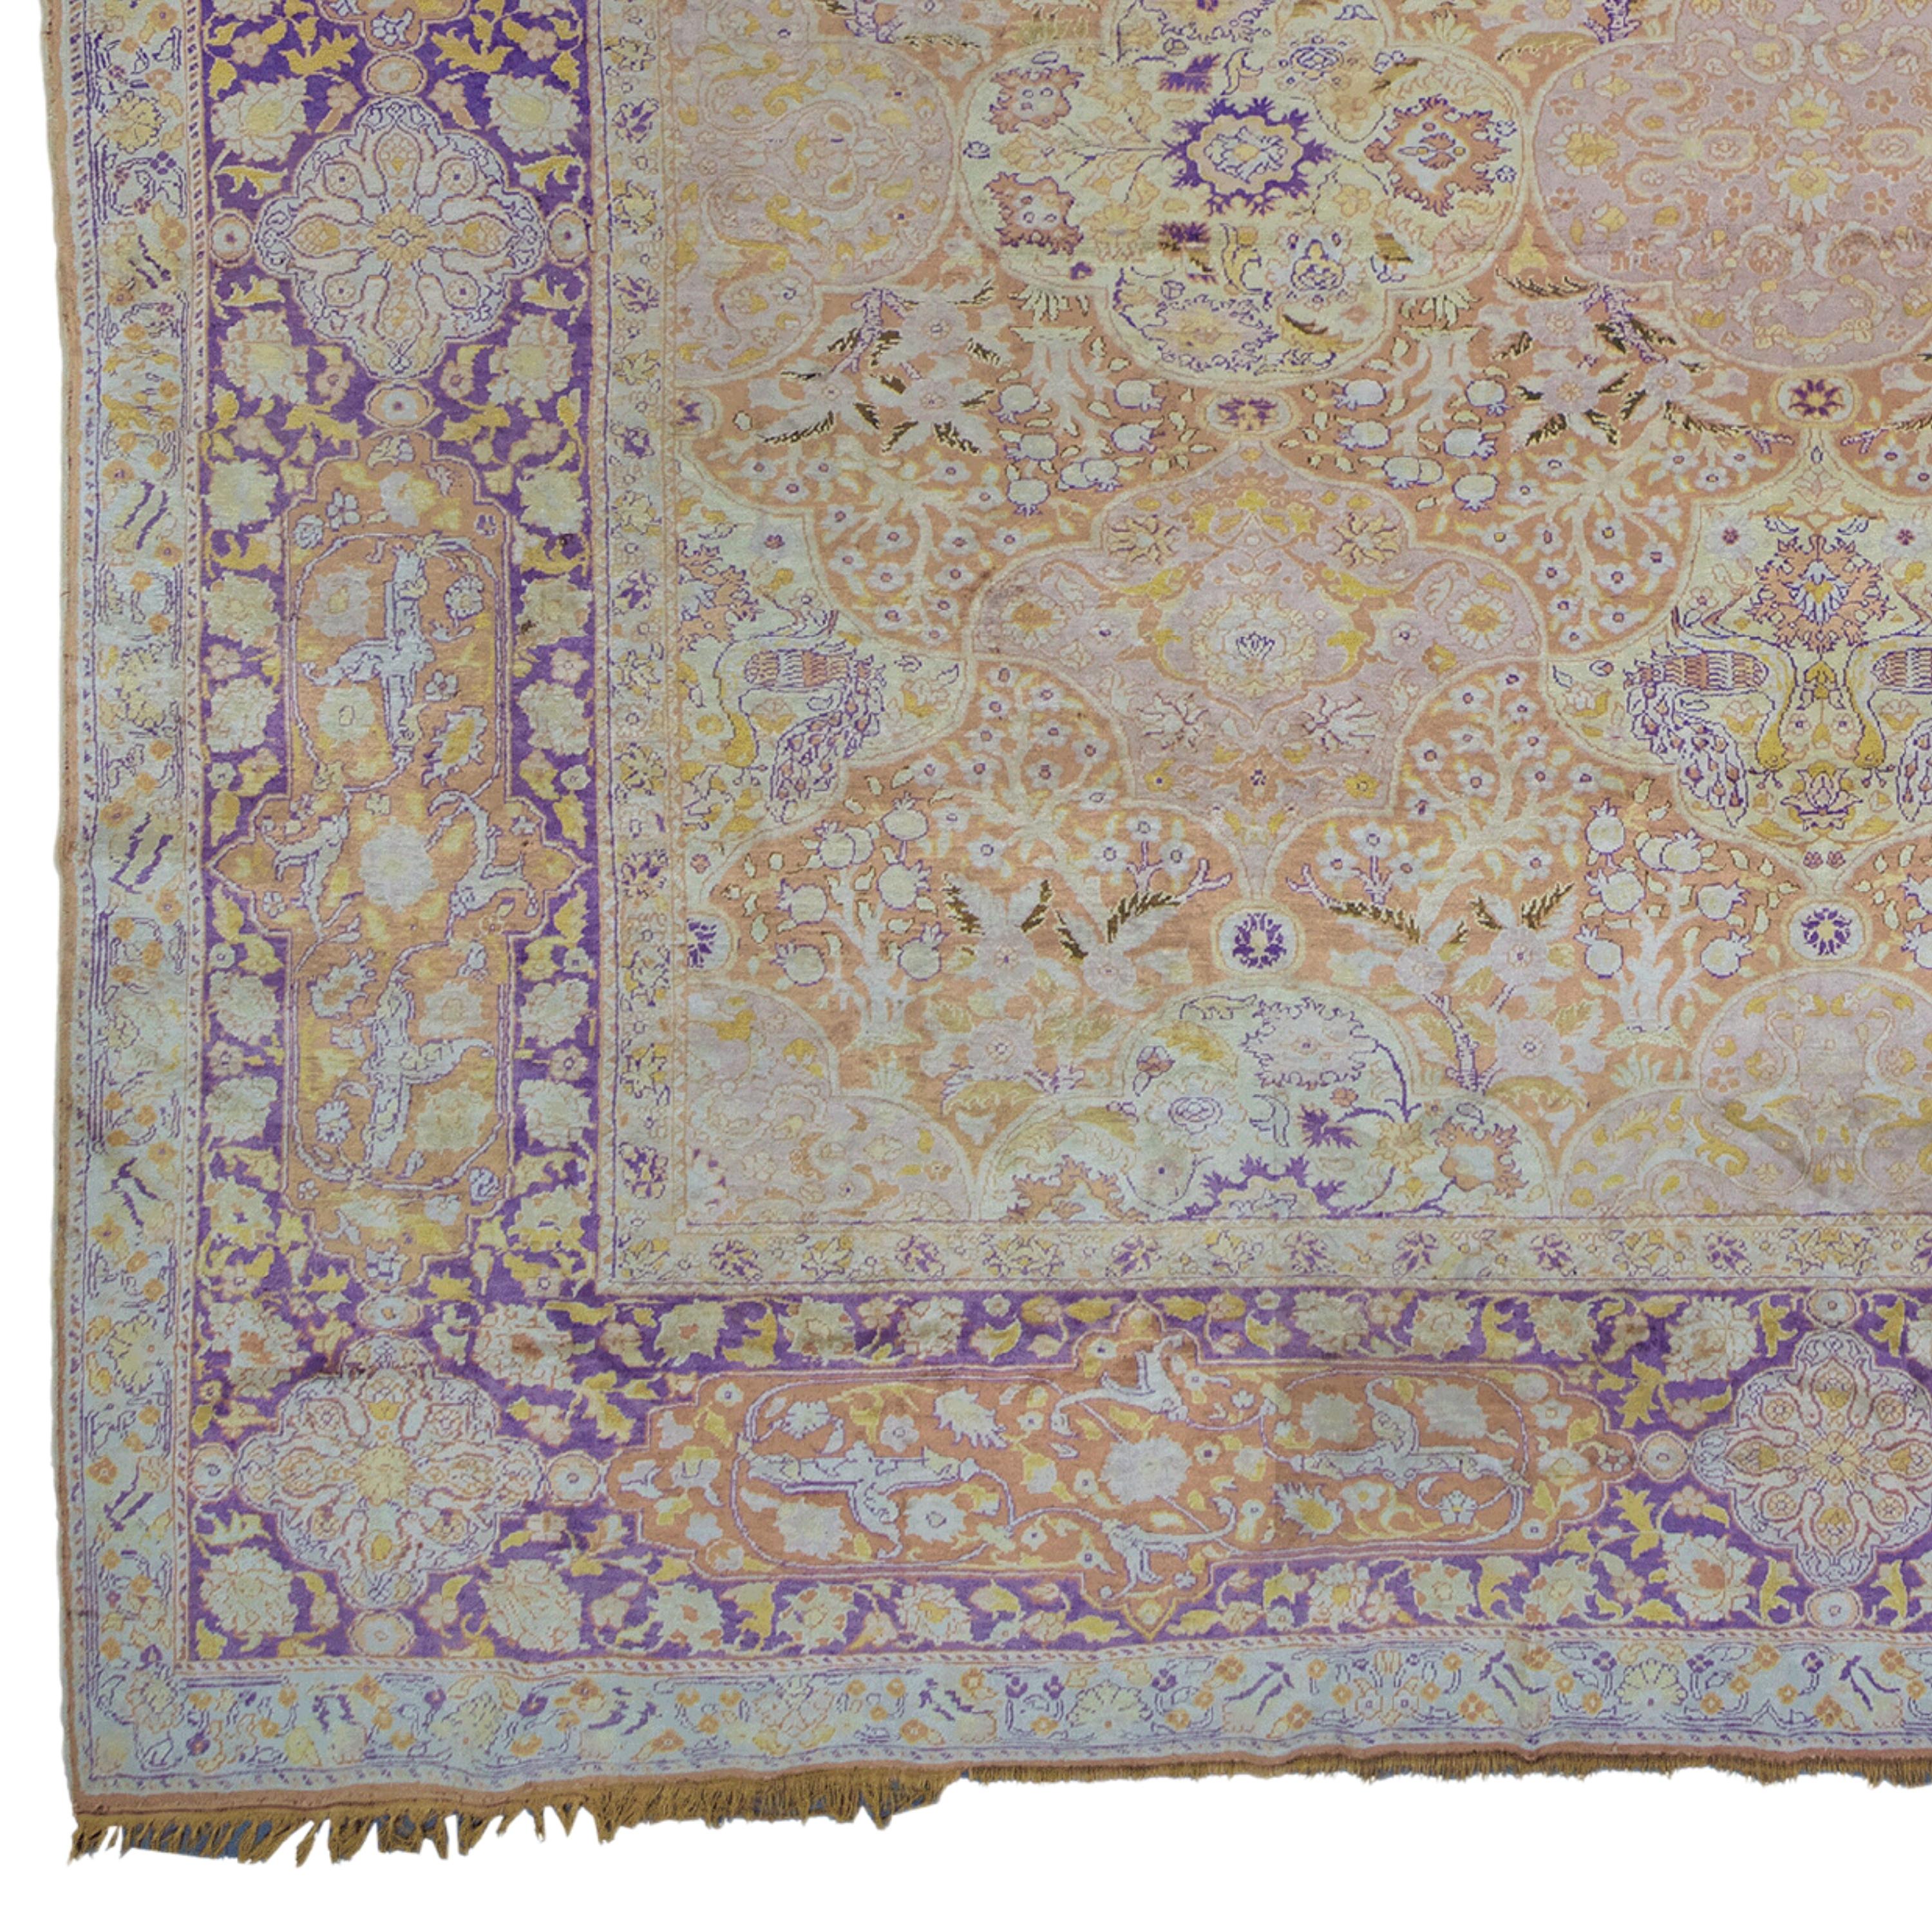 20th Century Silk Kayseri Carpet

This elegant 20th century silk Kayseri rug will be the perfect addition to your antique collection. With its rich history and sophisticated craftsmanship, this work adds an authentic touch to any space. This carpet,